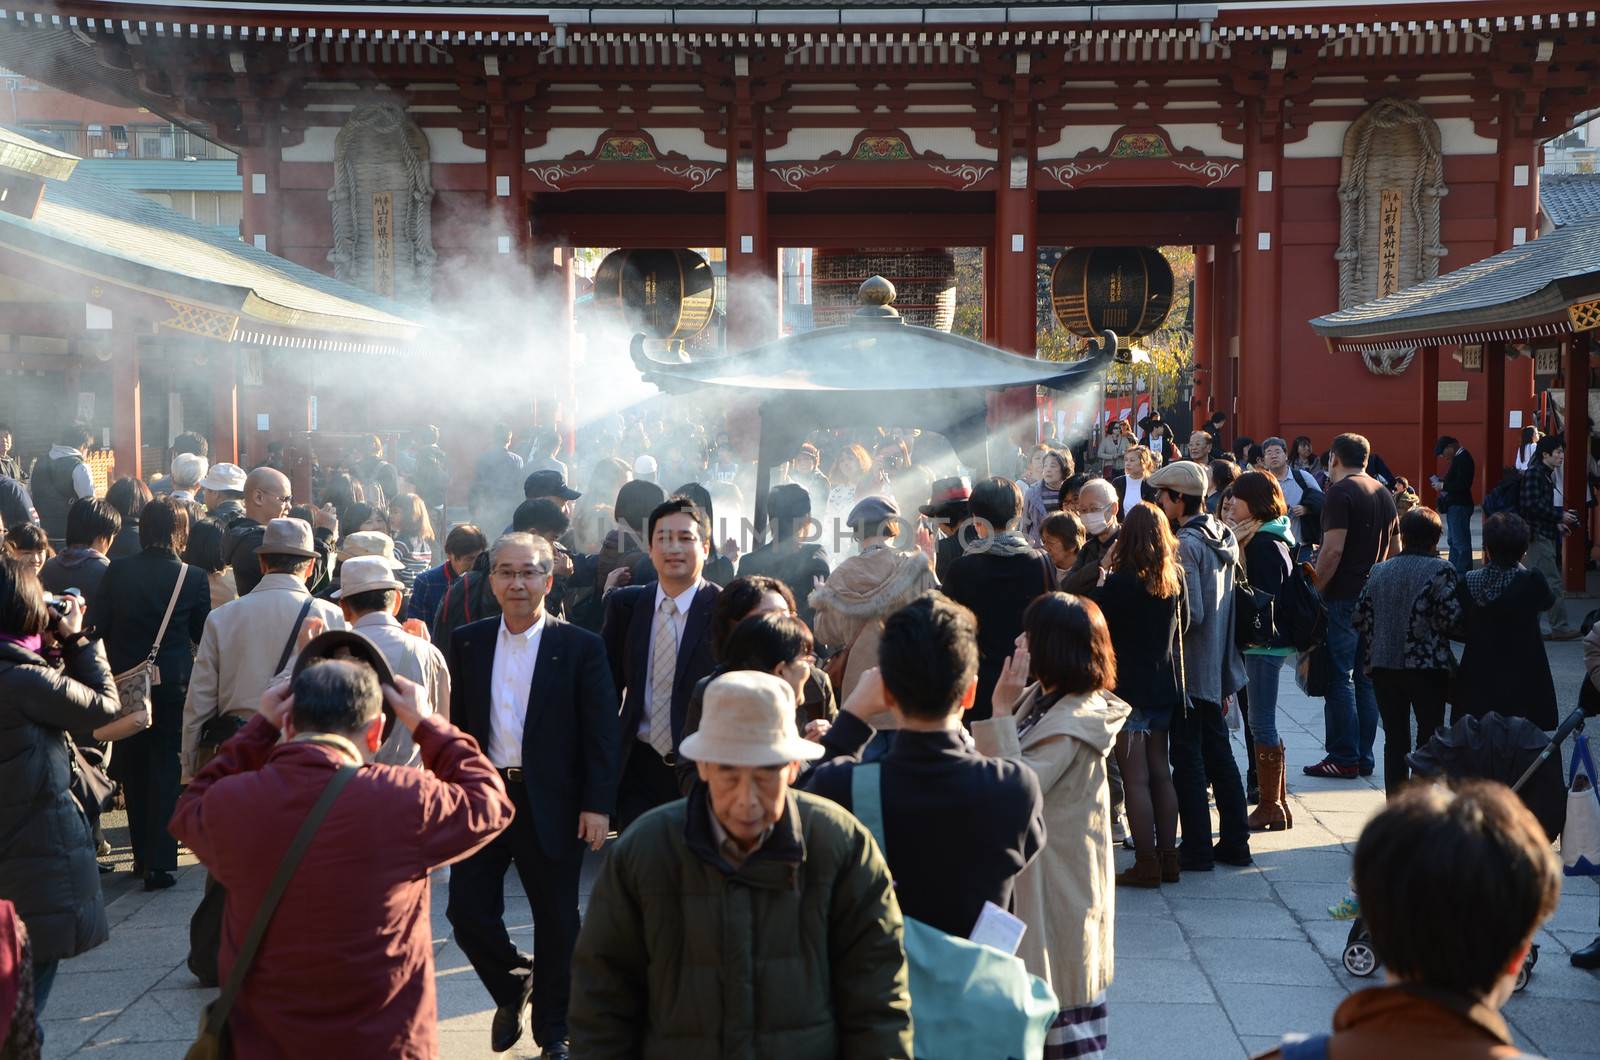 TOKYO, JAPAN - NOV 21: Buddhists gather around a fire to light incense and pray at Sensoji Temple on November 21, 2013 in Tokyo, Japan.